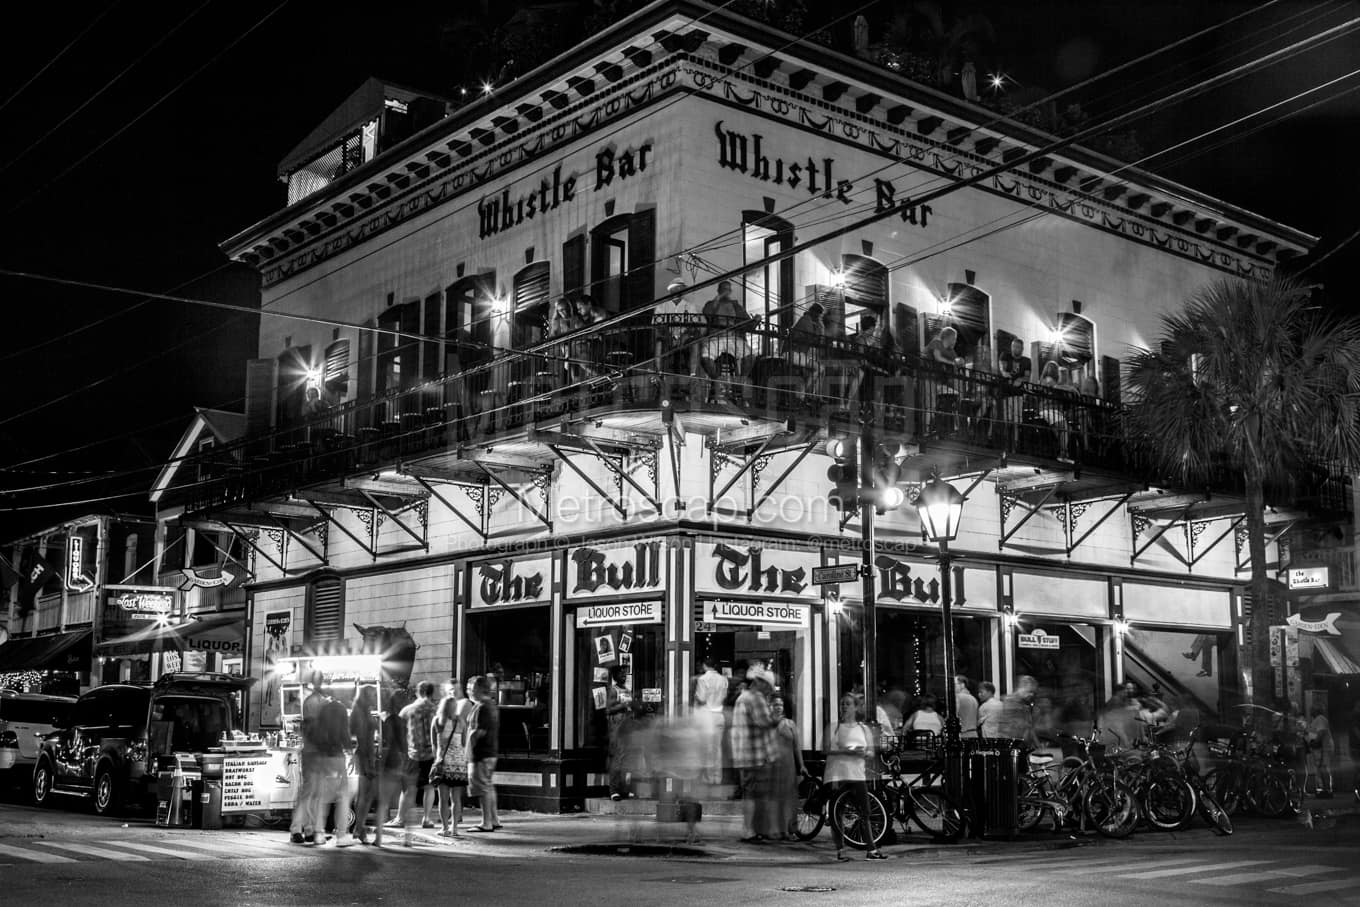 Black & White Key West Architecture Pictures